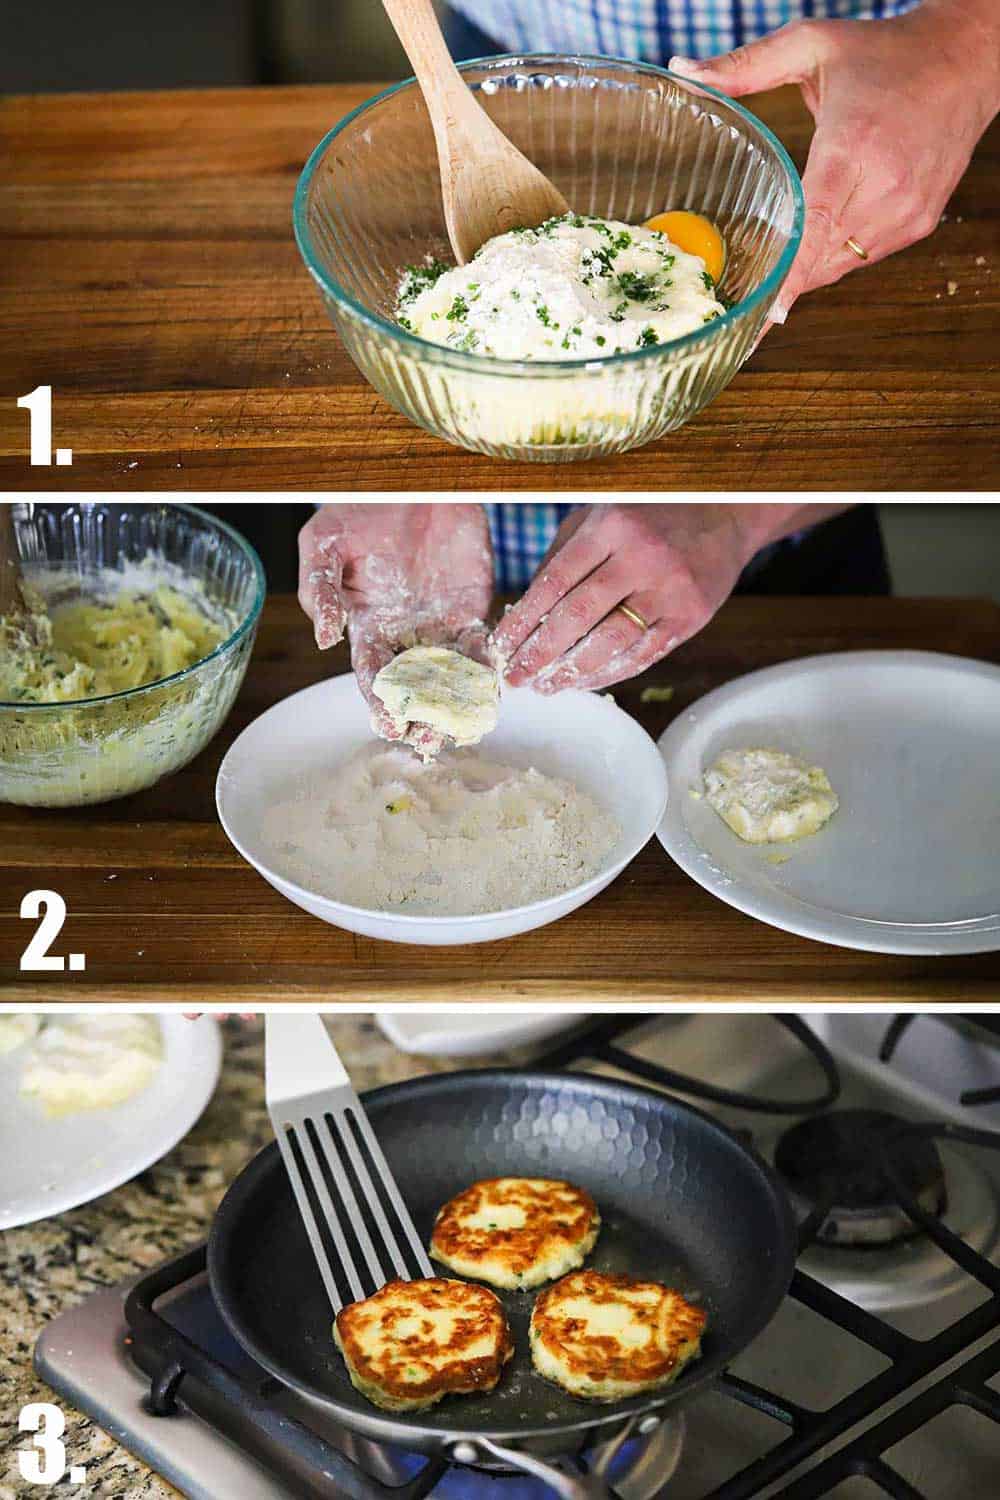 Mashed potatoes and an egg, flour, and chives in a glass bowl, and then two hand forming the mixture into patties, and then potato cakes being fried in a skillet. 